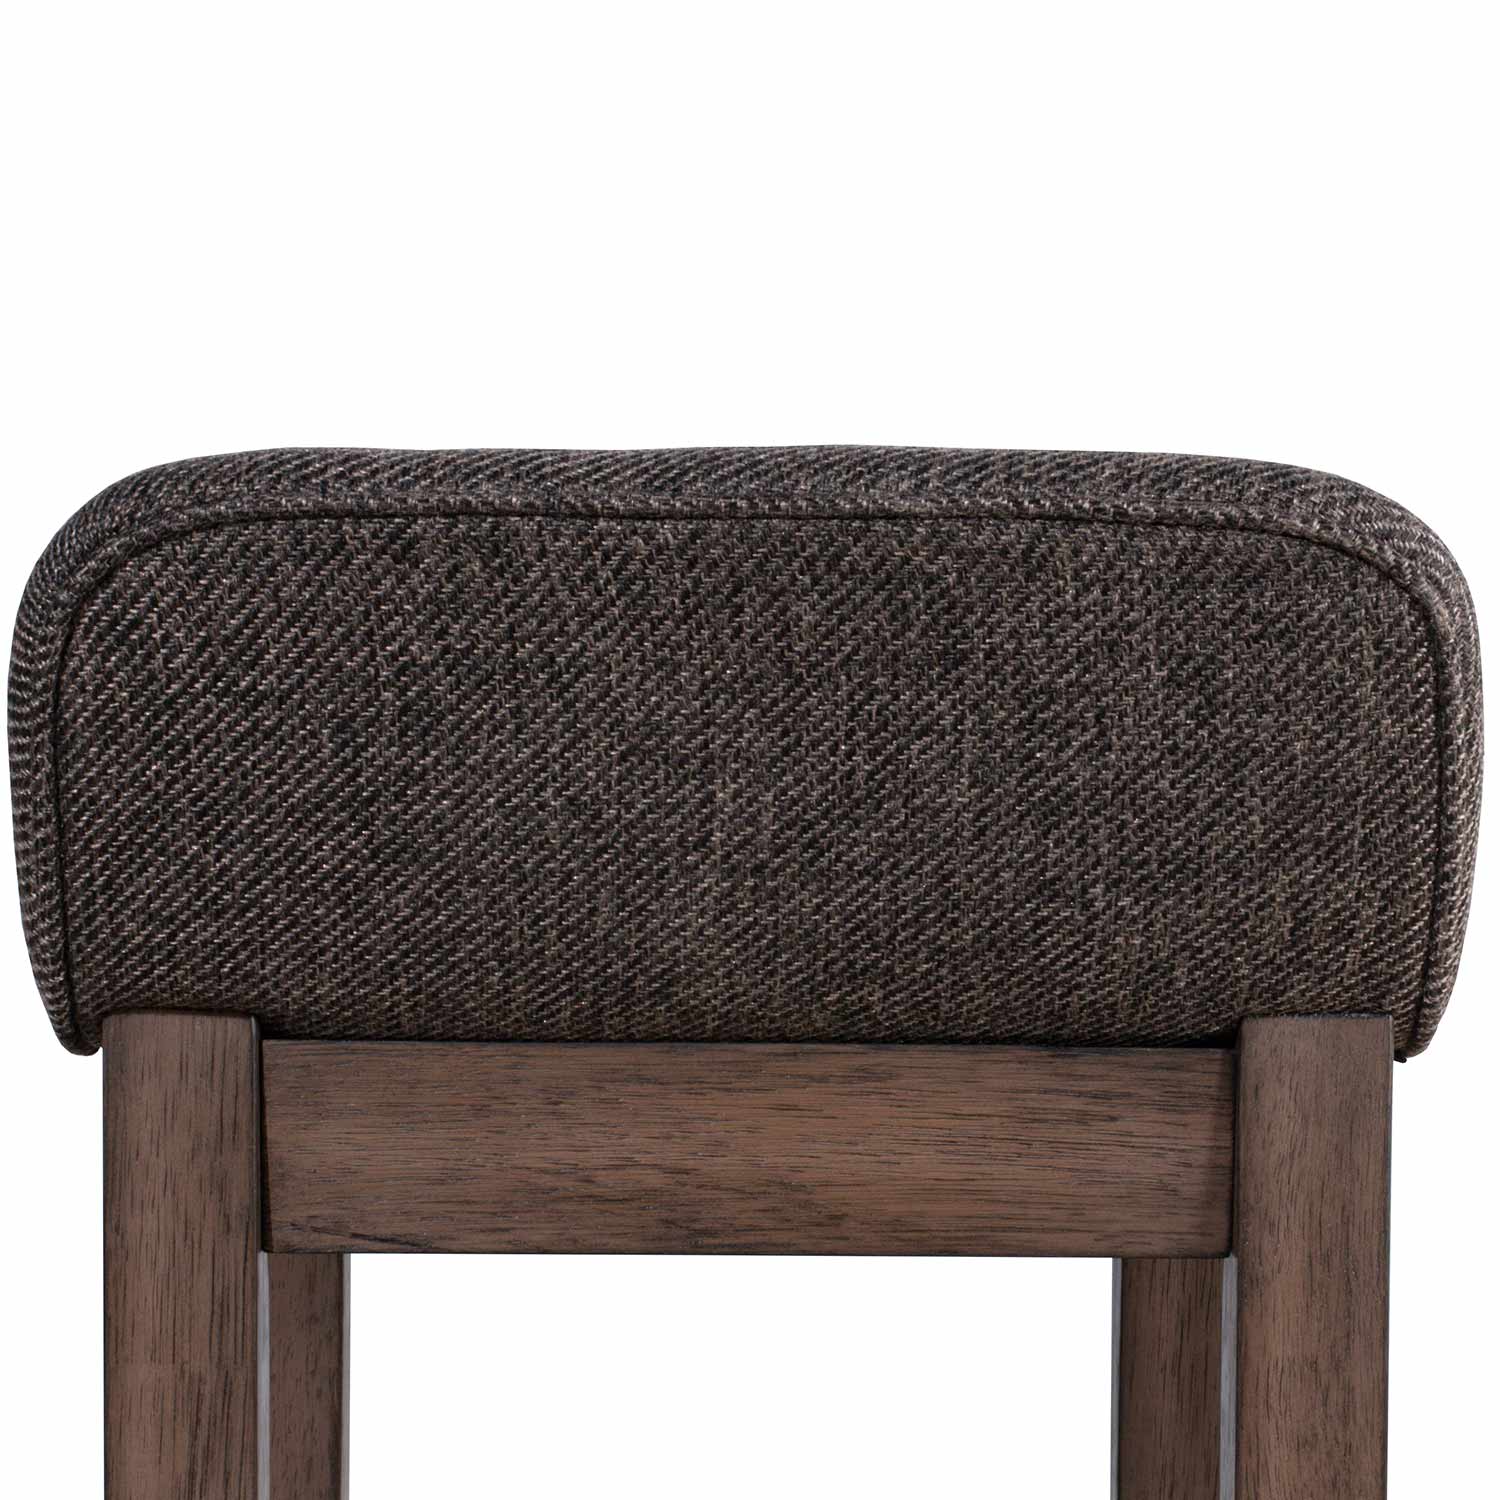 Hillsdale Renmark Renmark Counter Height Stool - Brushed Gray